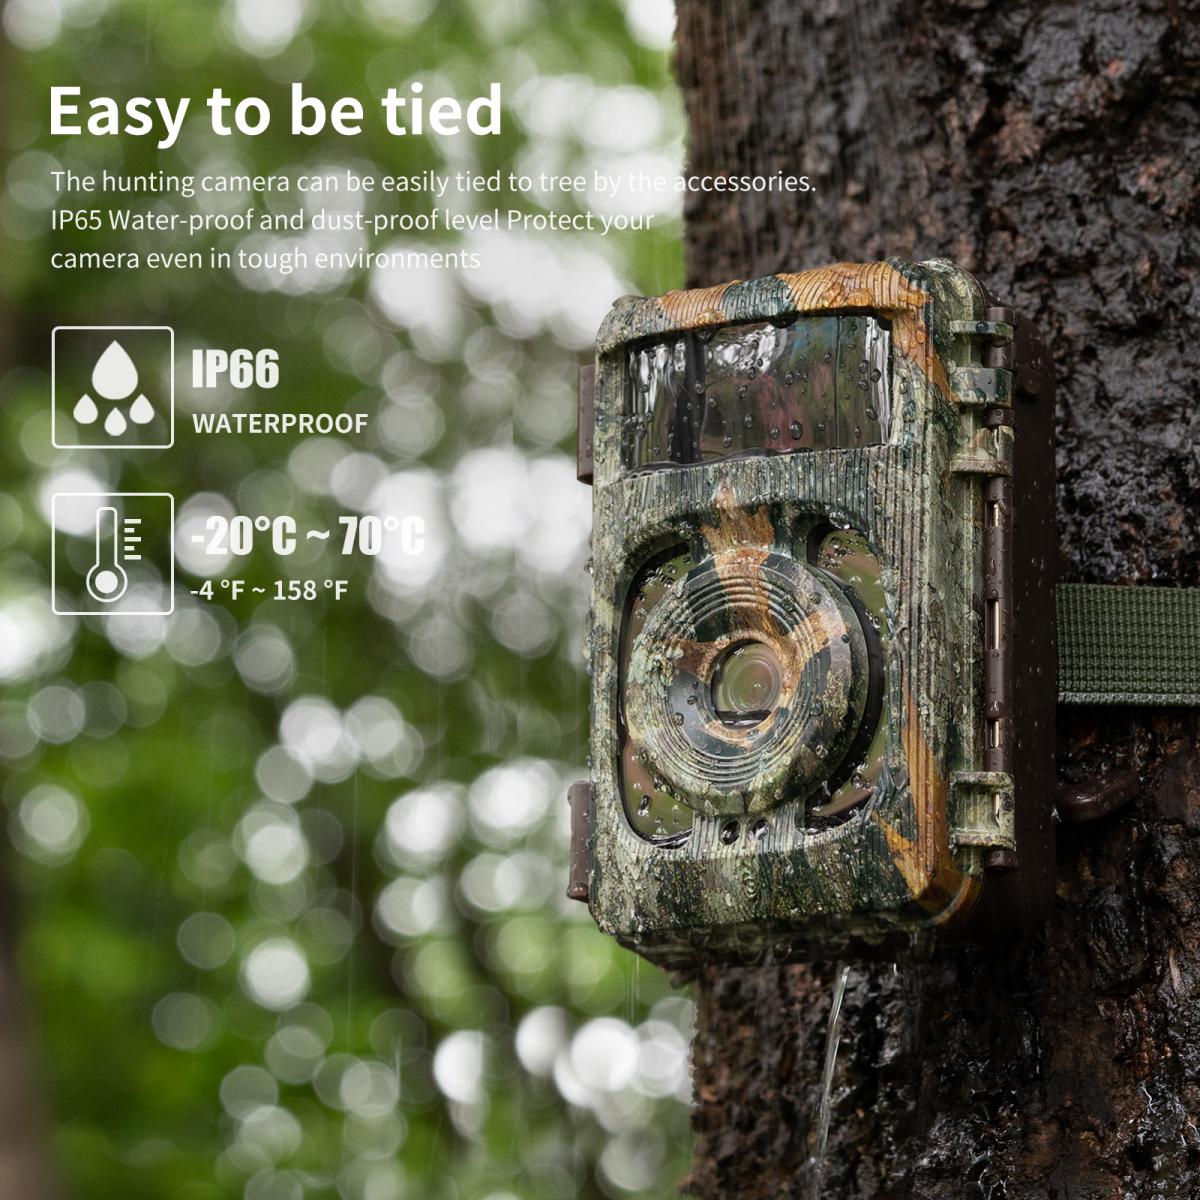 K&F Concept 4K trail wildlife waterproof camera with 32MP photos, 4K Video, WiFi & Bluetooth